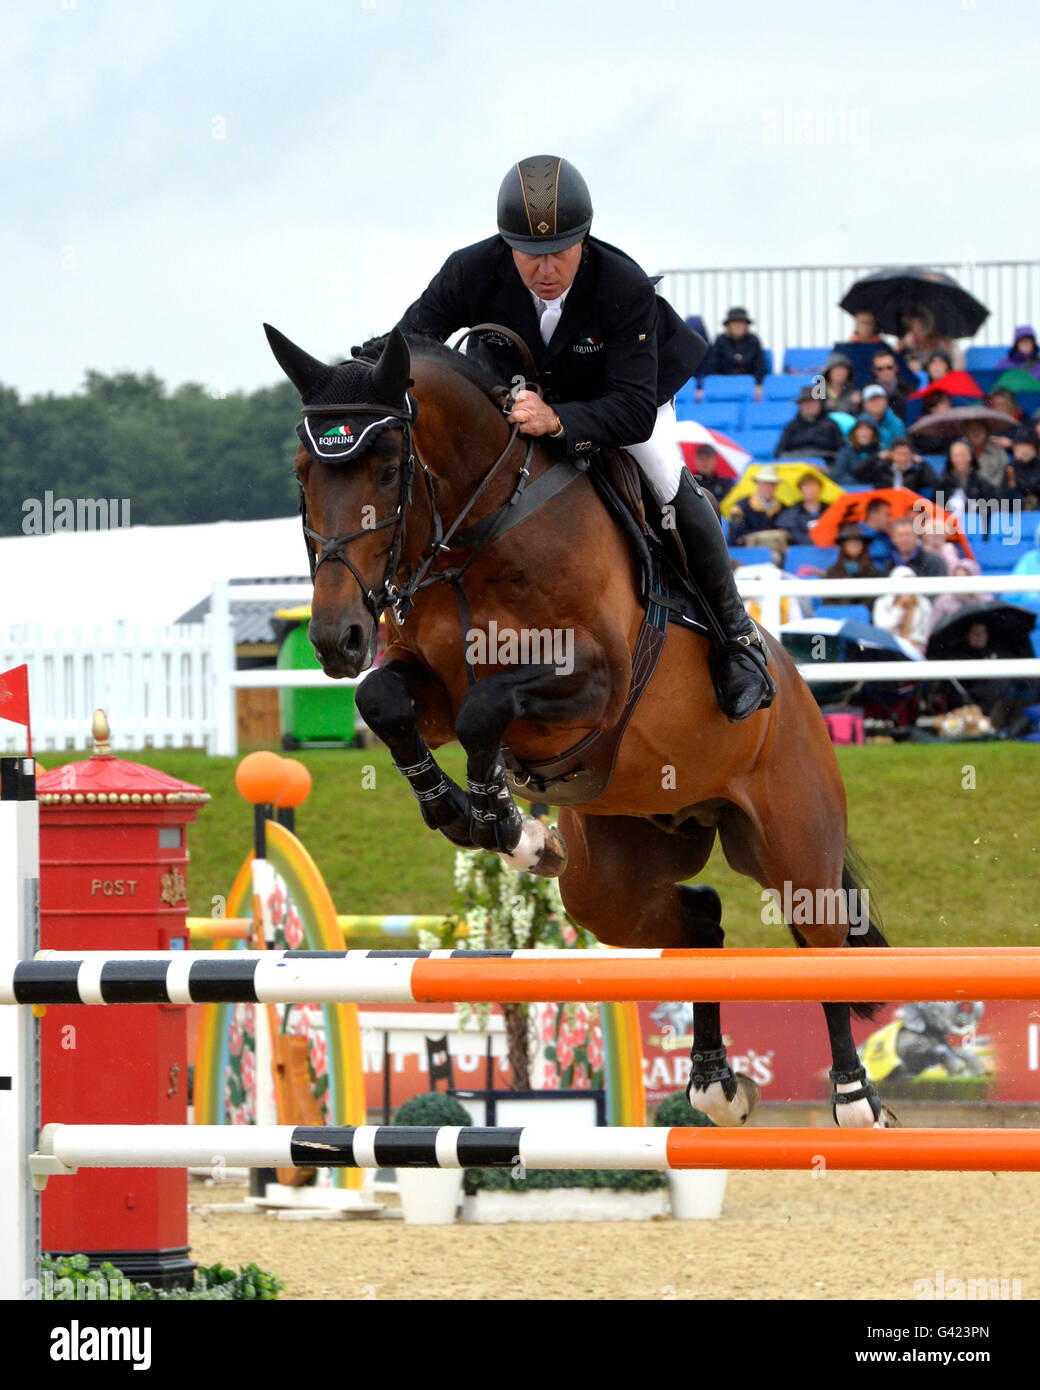 Cheshire, UK. 16th June, 2016. Olympic Gold Medal pairing of Nick Skelton on Big Star  competing yesterday and over this weekend at the Bolesworth International Showjumping Show in Cheshire Credit:  Trevor Meeks/Alamy Live News Stock Photo